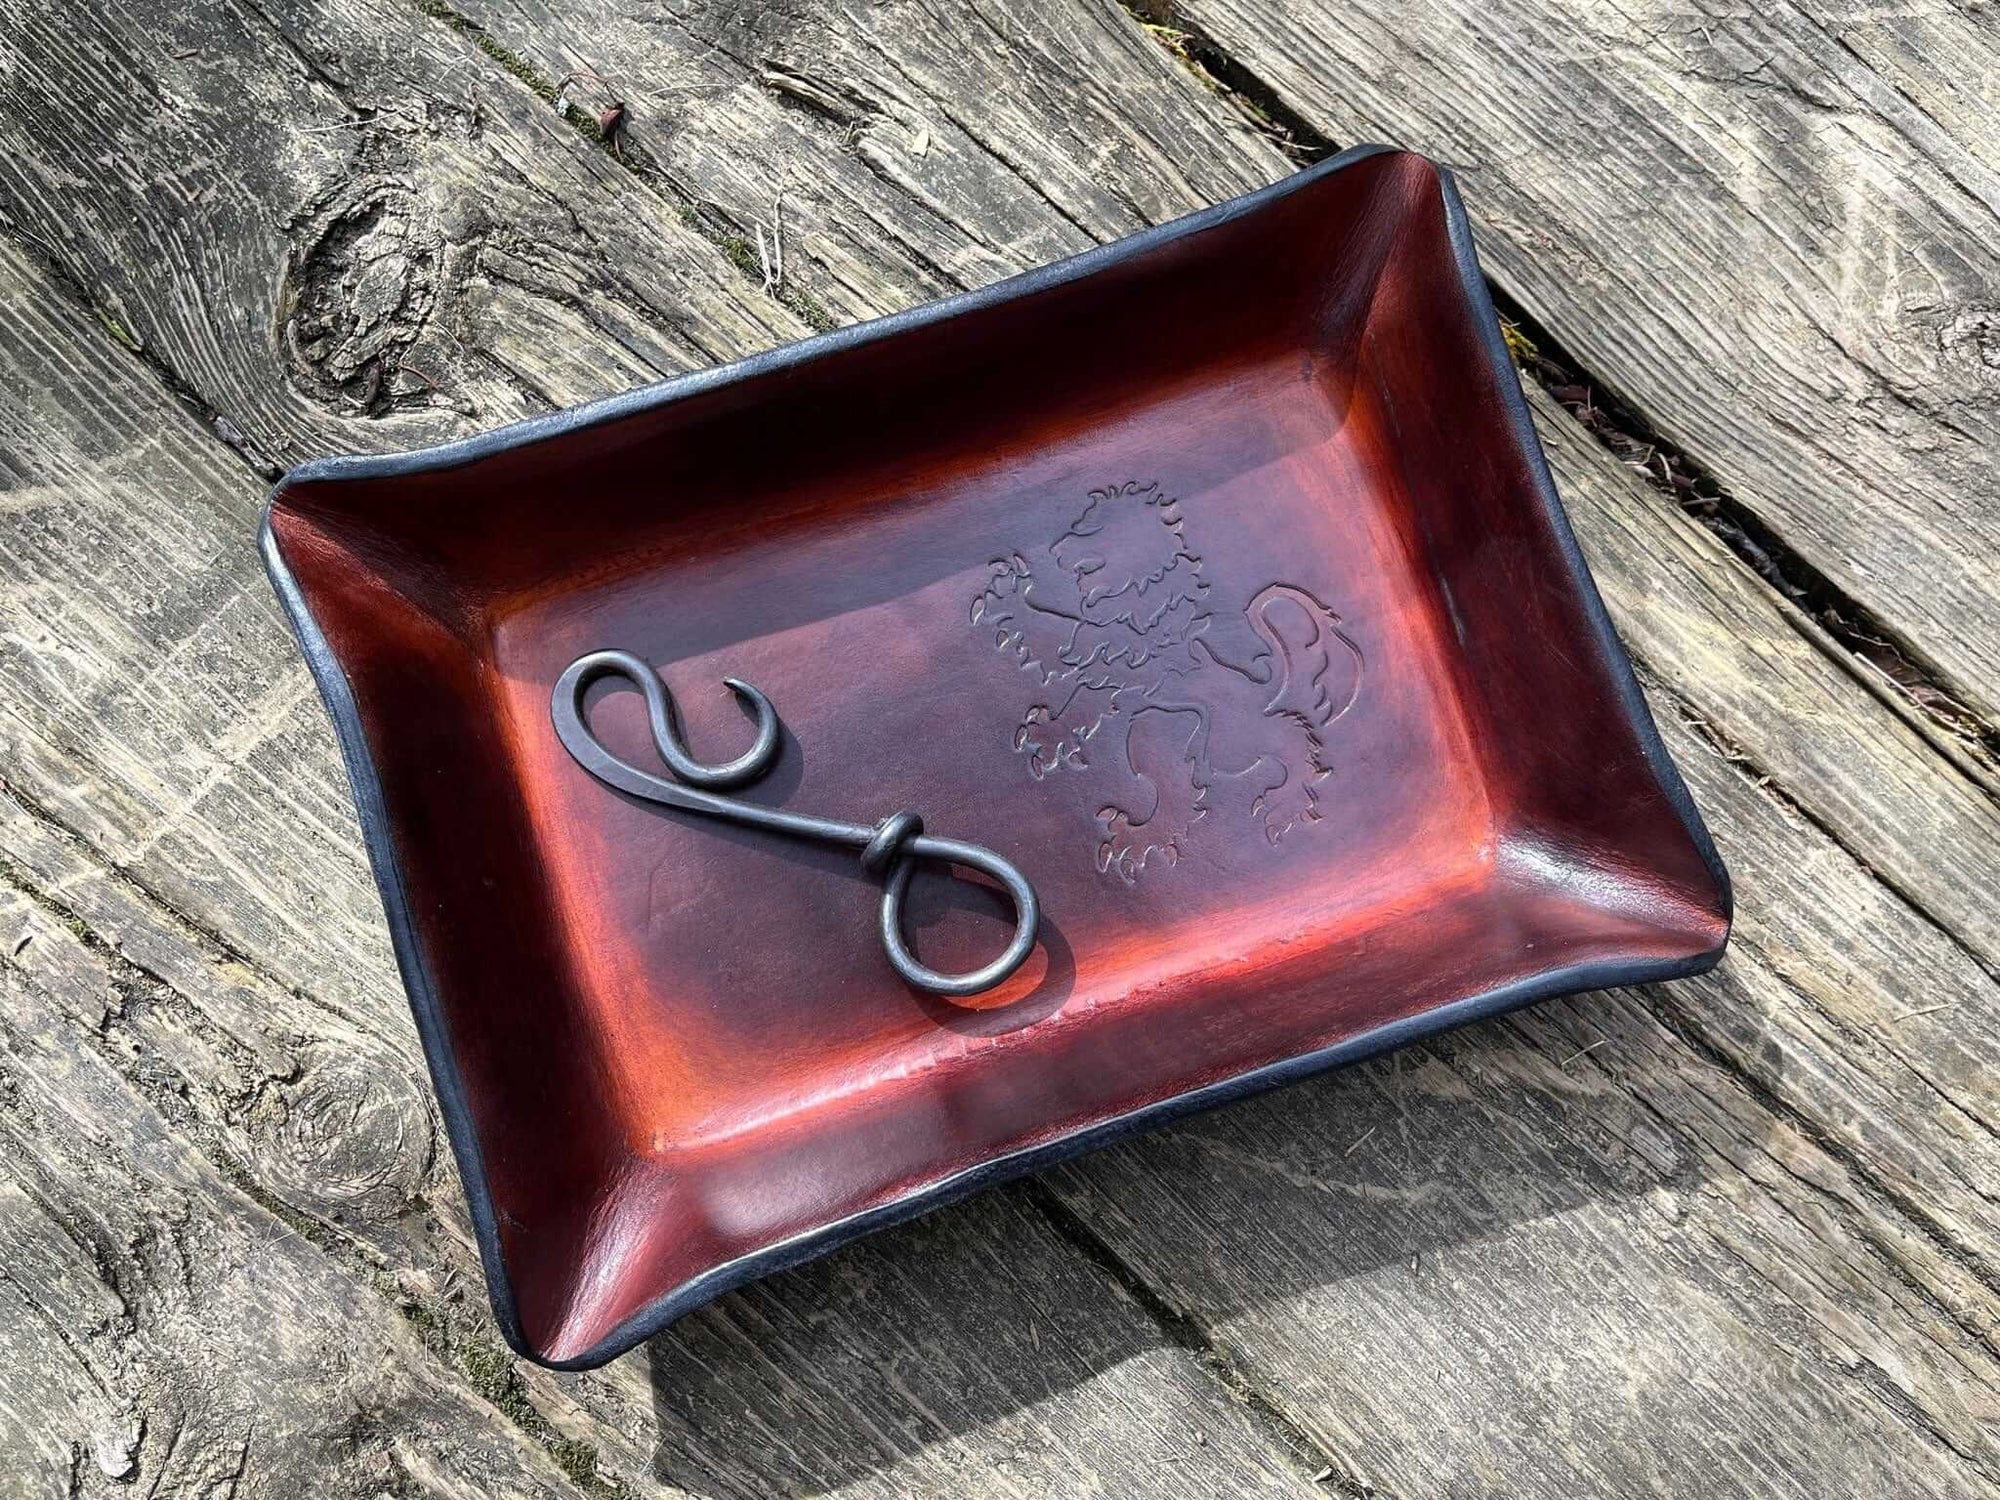 Rampant Lion leather tray shown with bottle opener keychain.